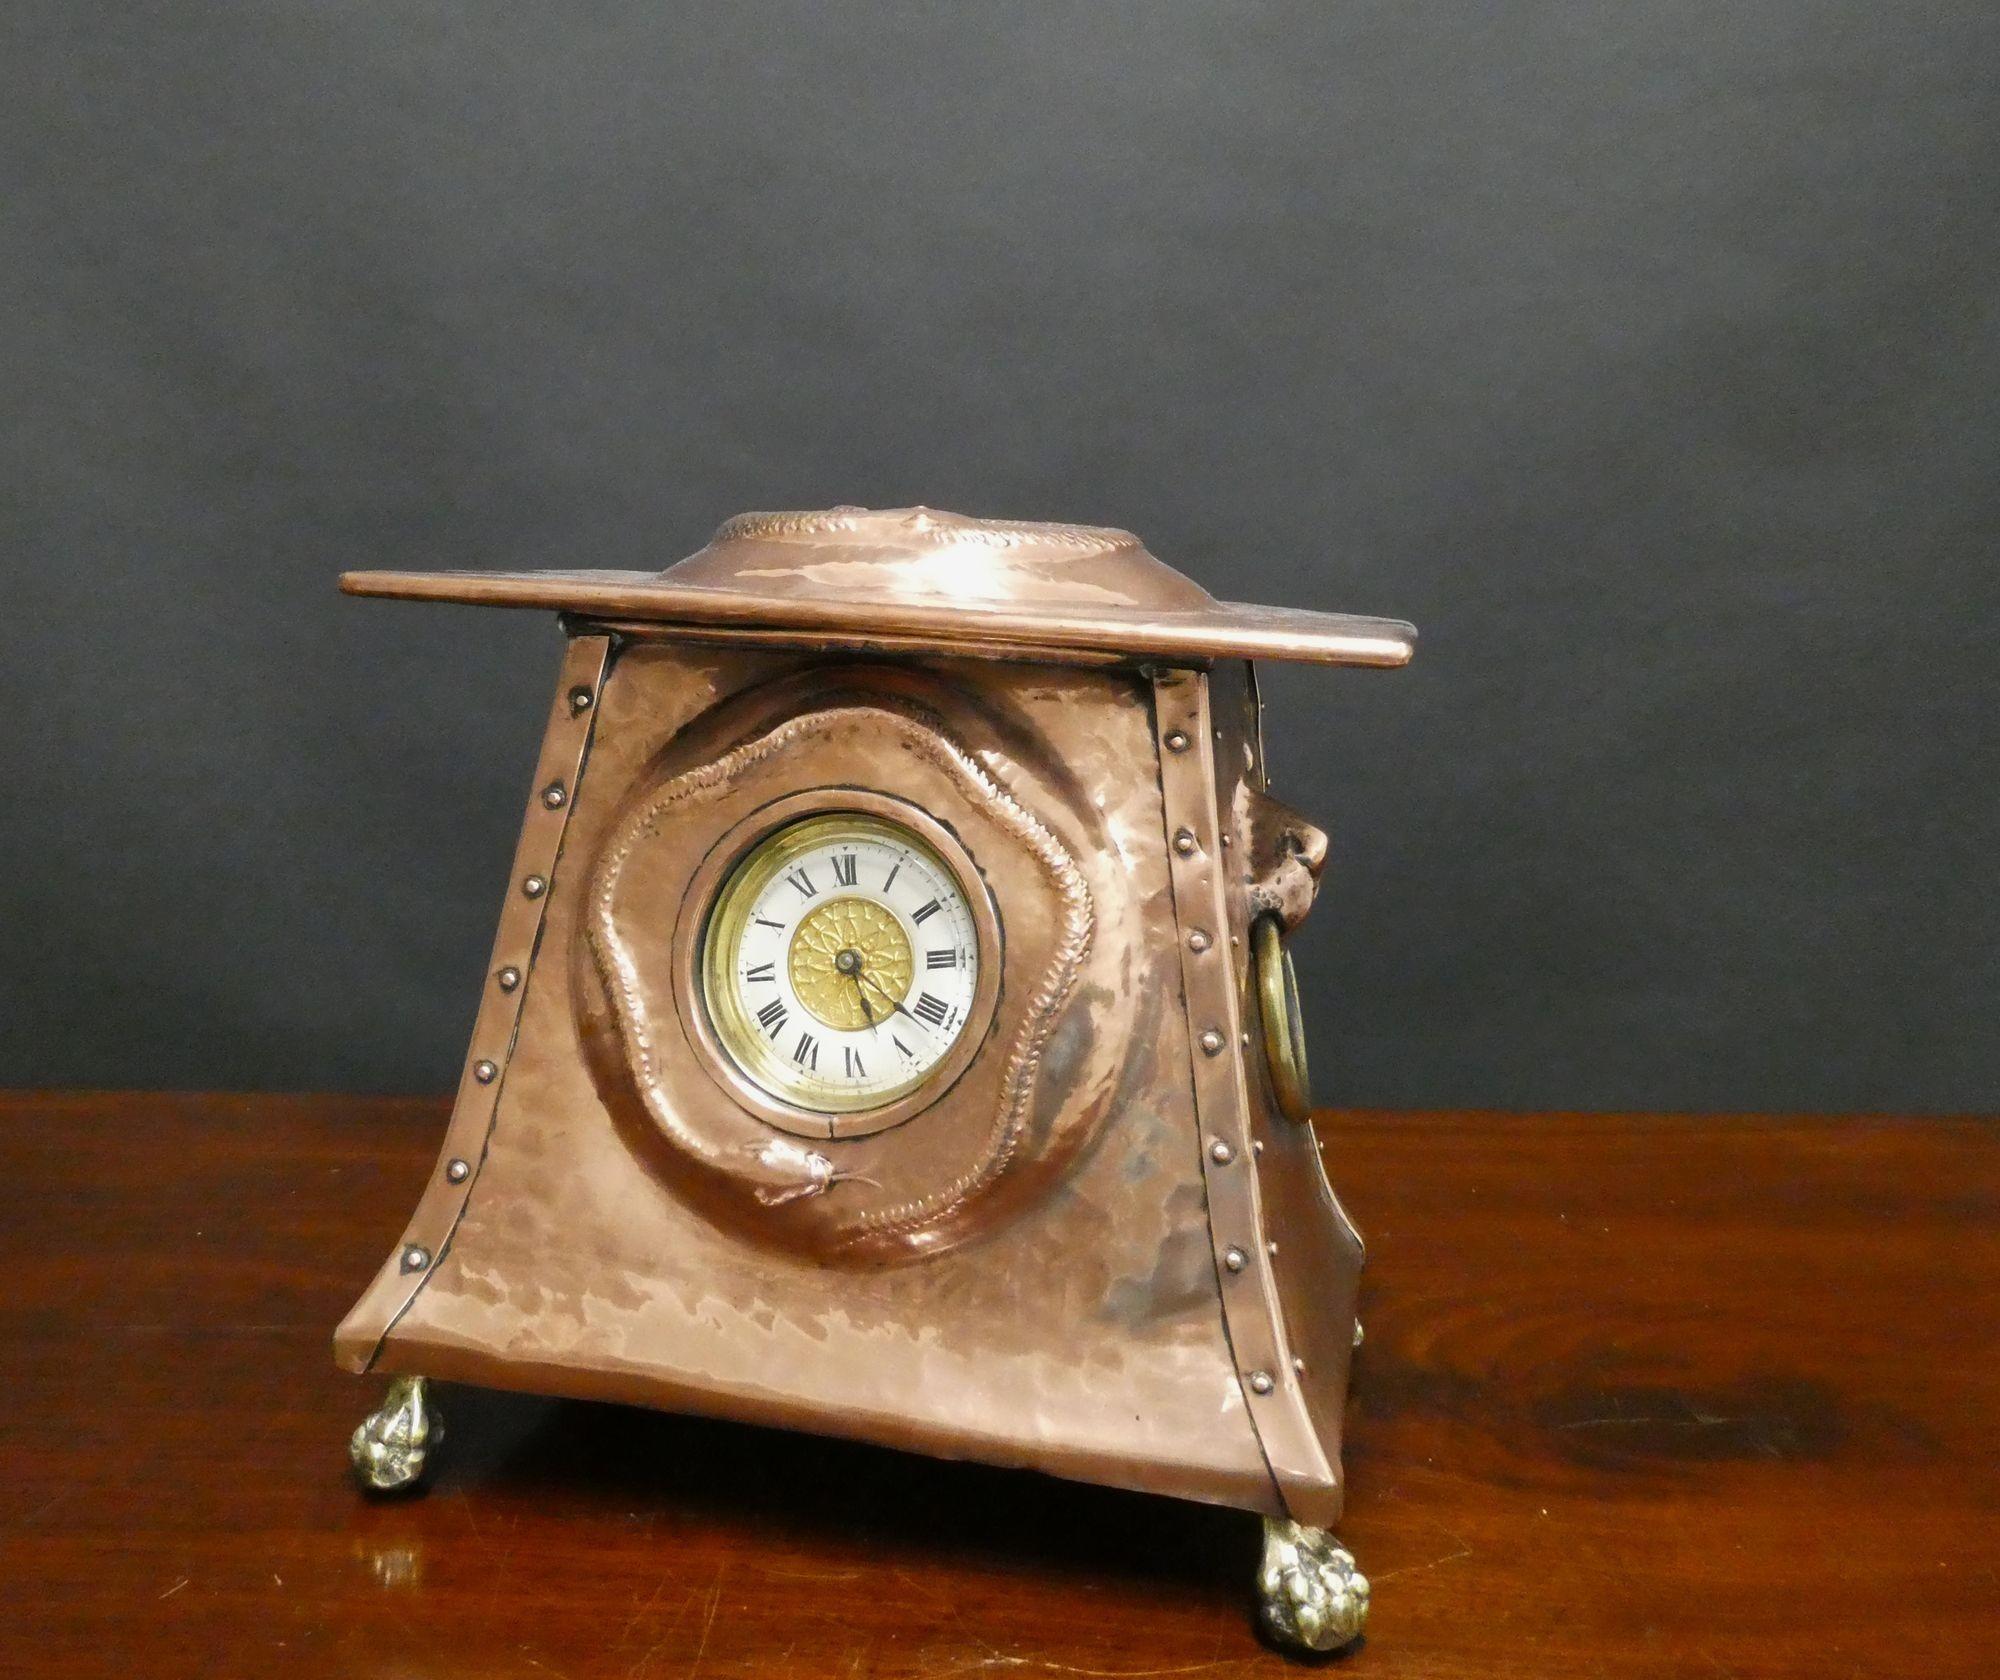 Arts and Crafts Copper Mantel Clock
A most unusual Arts and Crafts mantel clock in an outswept hammered copper case with lions head ring side carrying handles and surmounted by a coiled serpent, resting on four brass lions claw feet.
The dial with